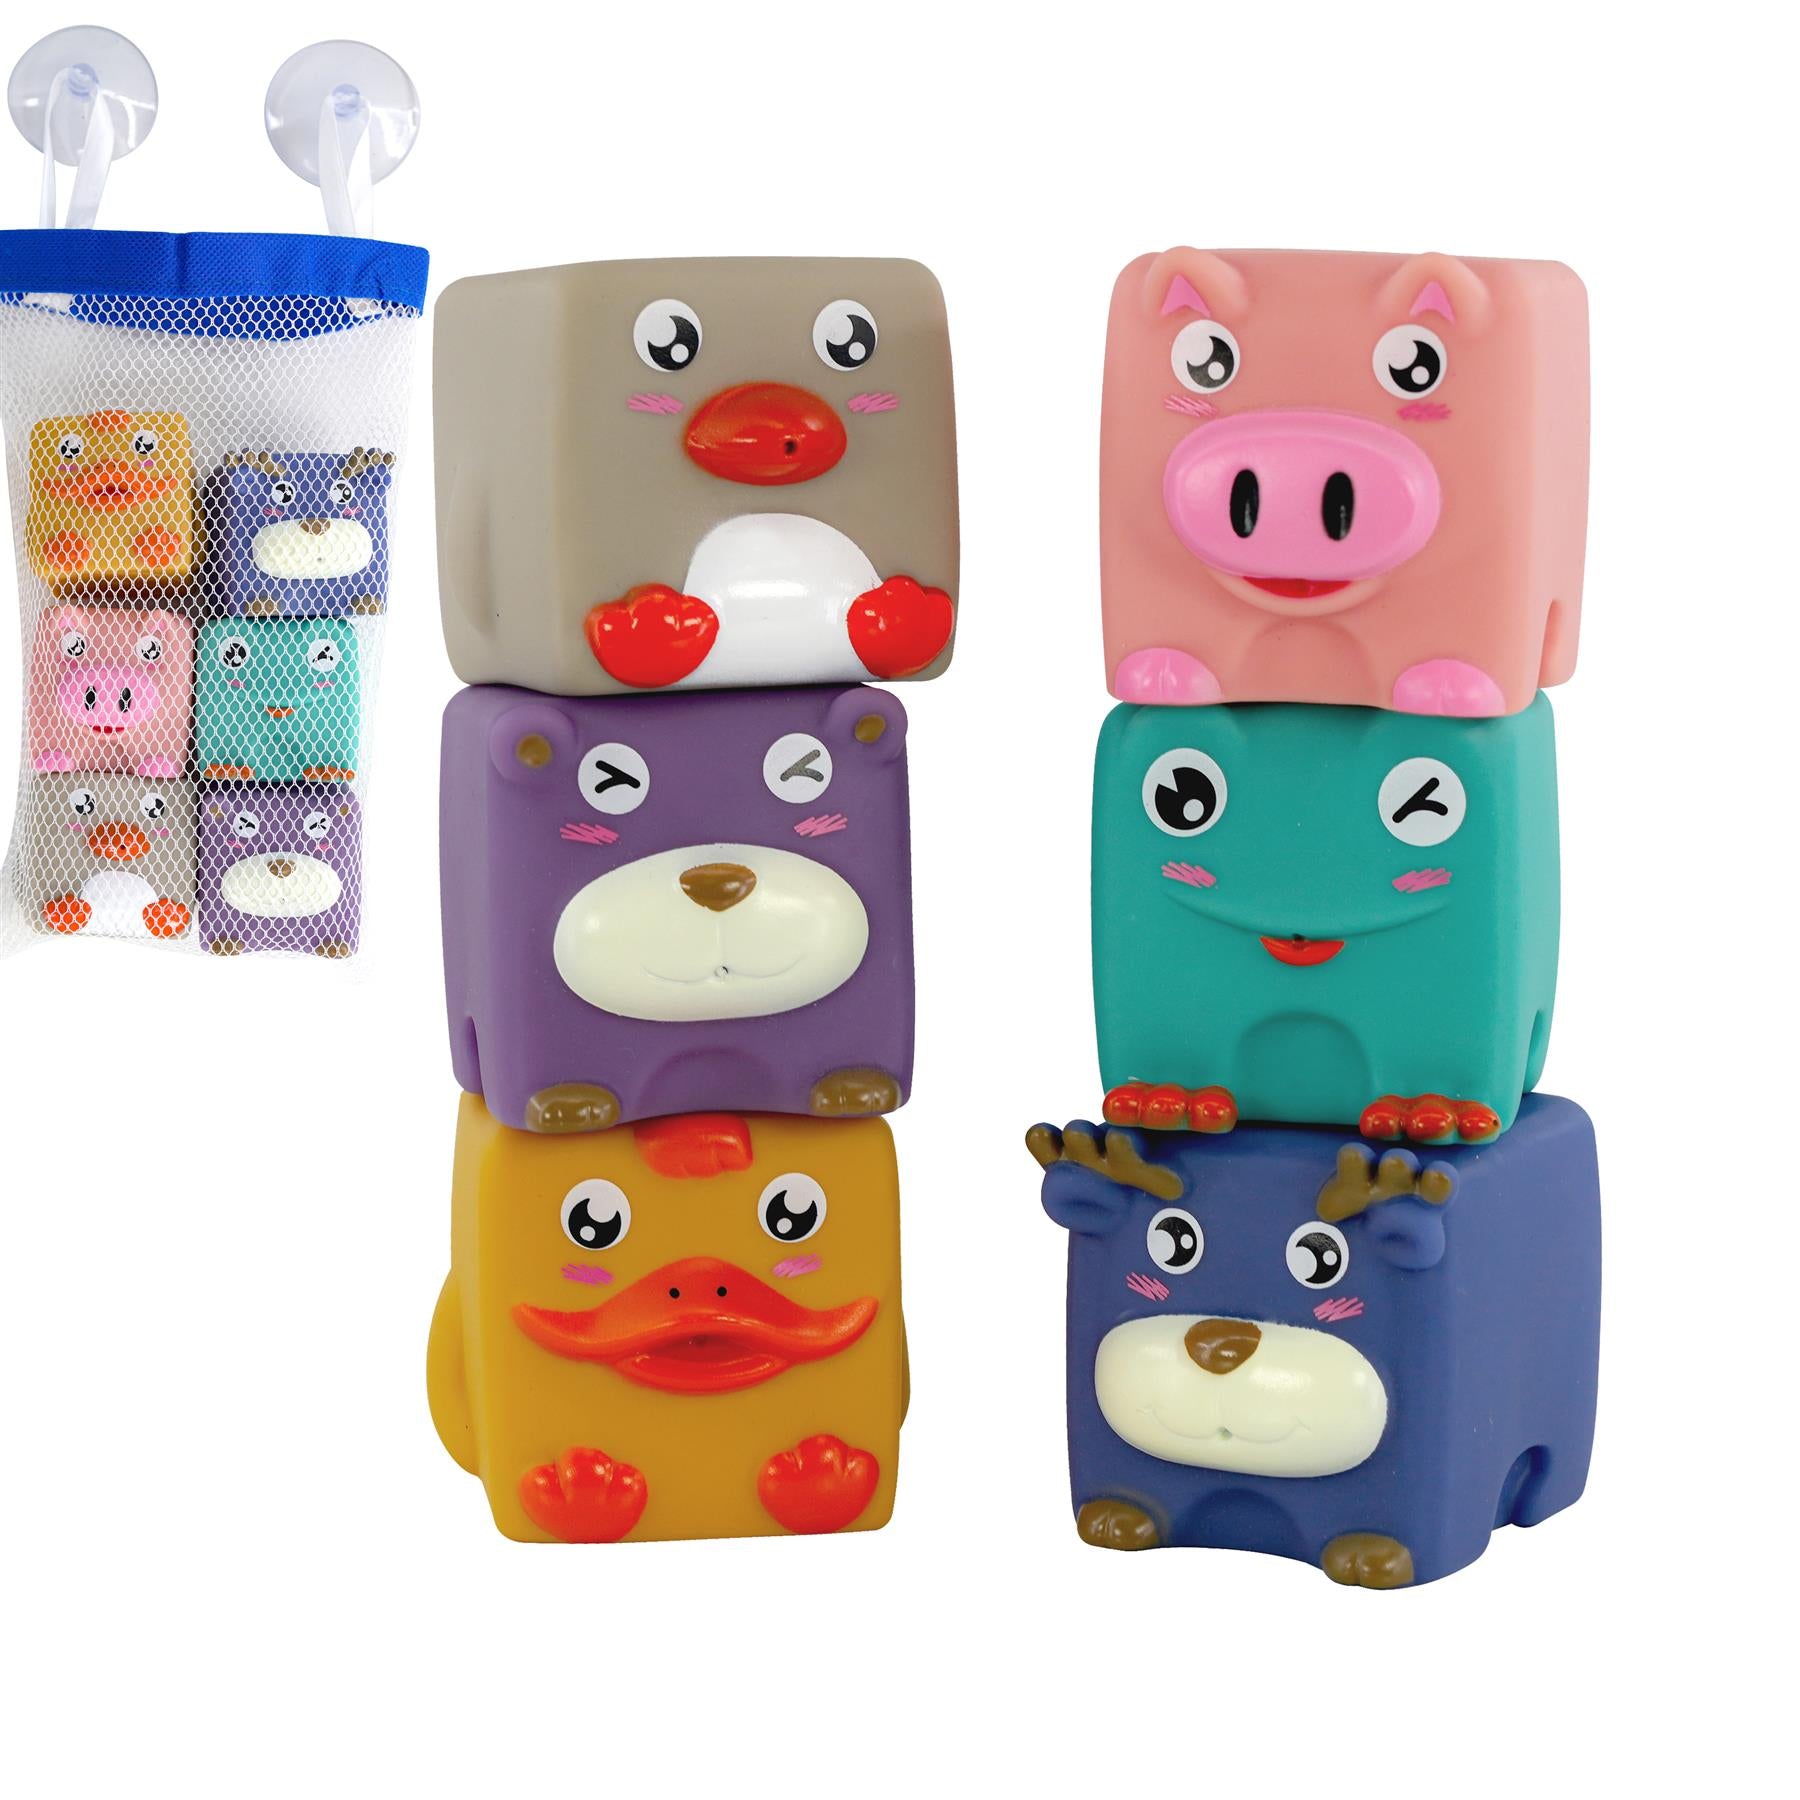 6 Pieces Stacking Building Blocks With Squeaky Sound